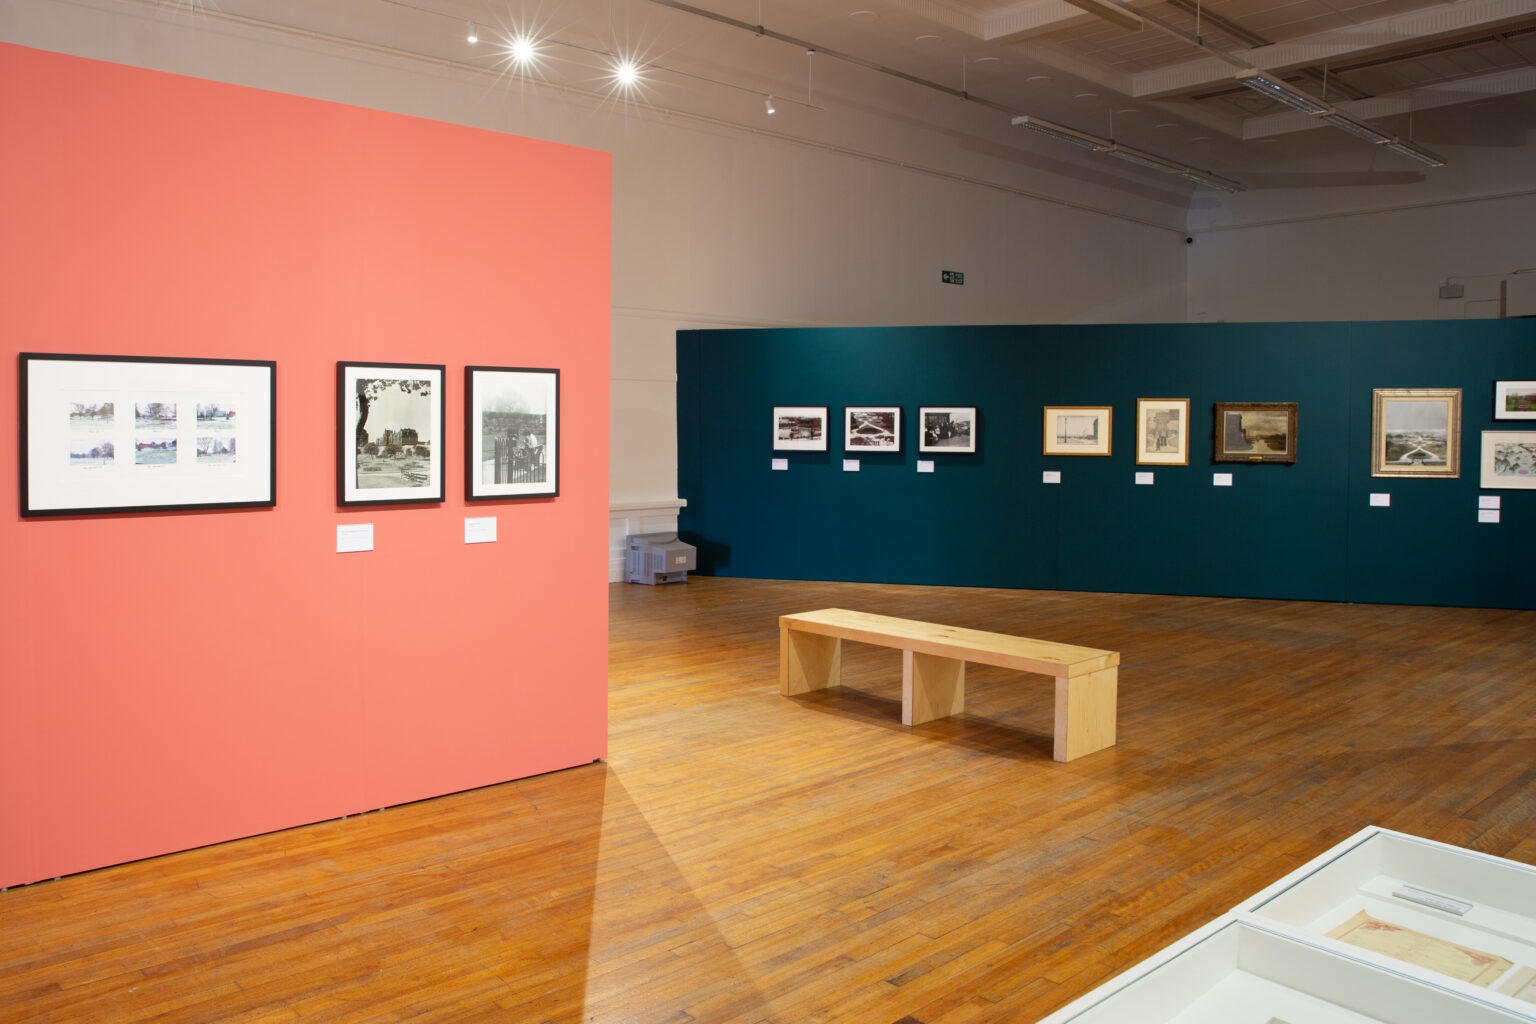 An installation image of the exhibition; it shows two walls painted pink and green with pictures hung in straight lines.